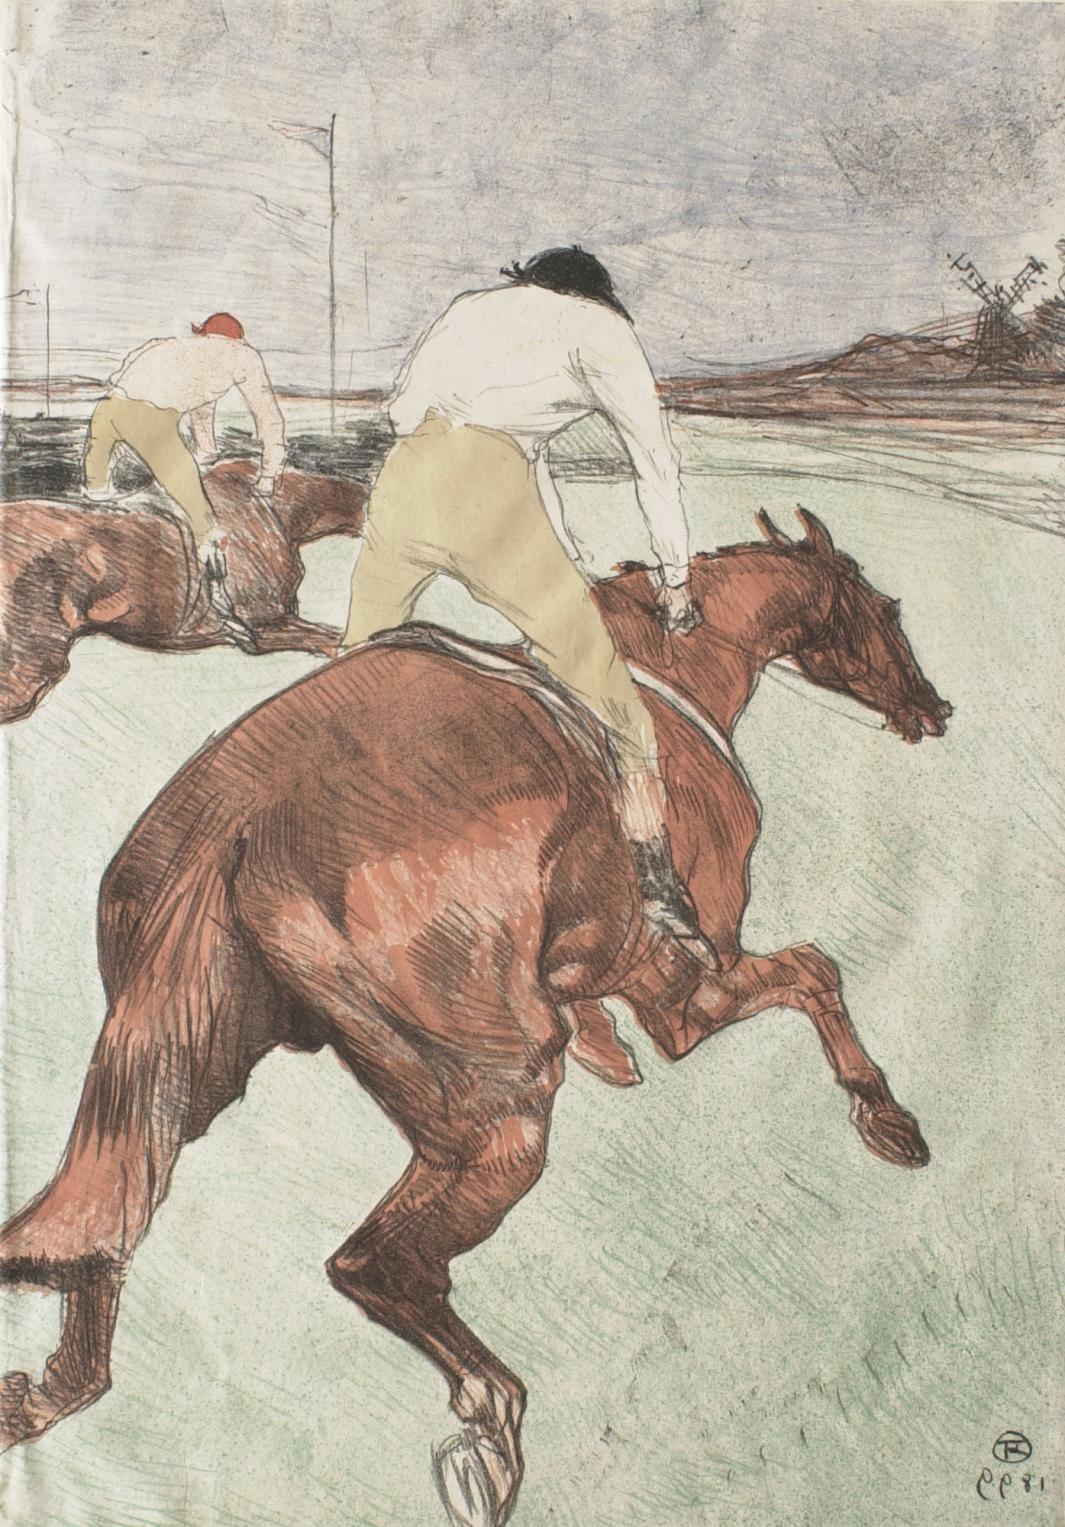 Color print of two men on horseback, seen from behind